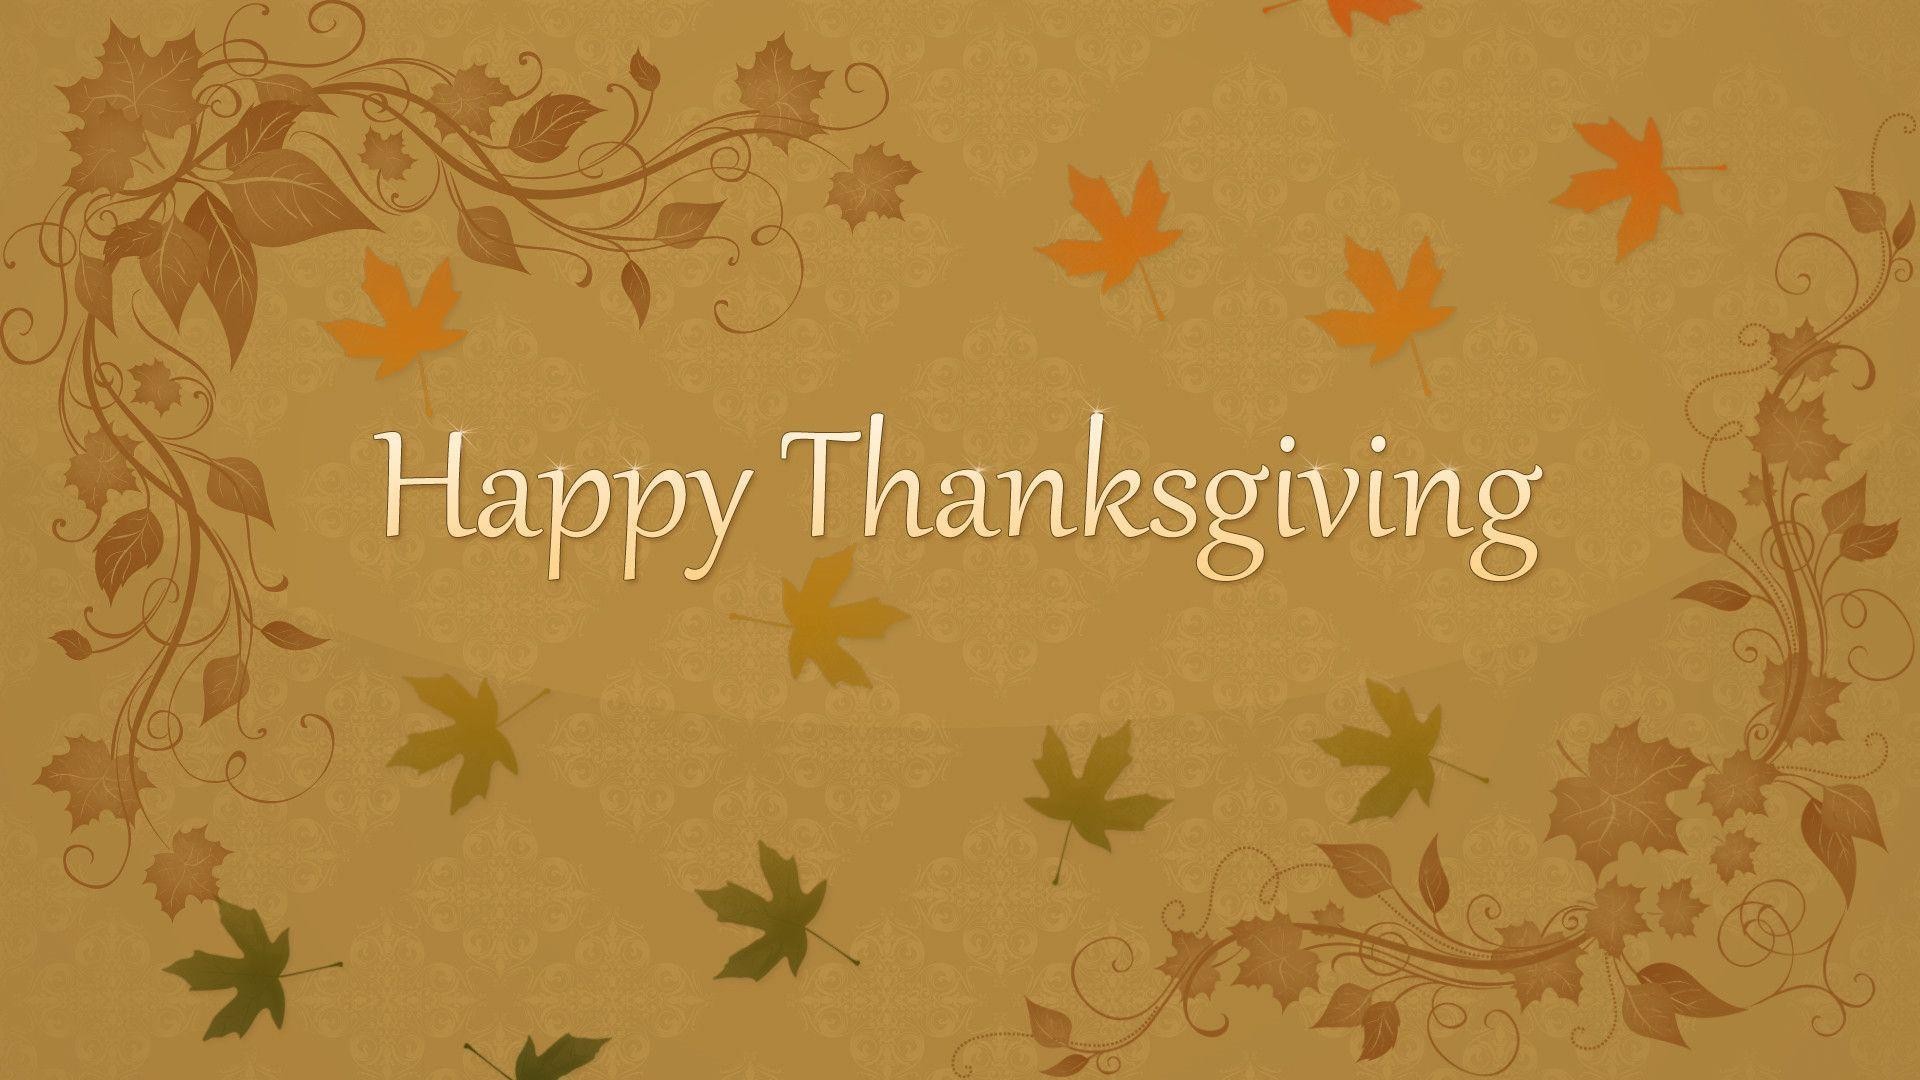 1920x1080 Top 15+ Images for Wallpaper Happy Thanksgiving | Image No: 10. File Type